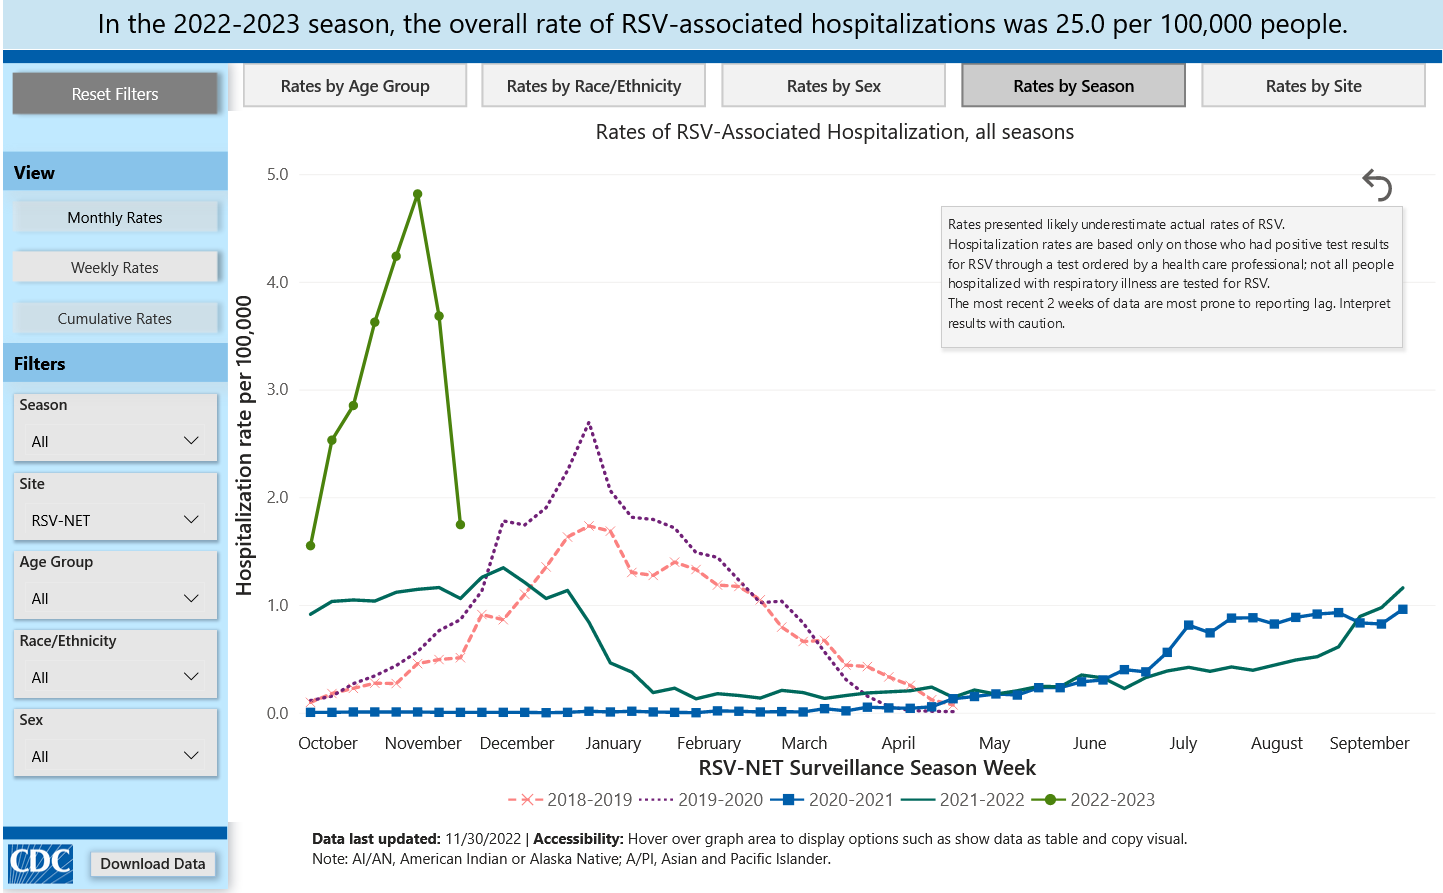 Rate of RSV-Associated Hospitaliztions, all seasons